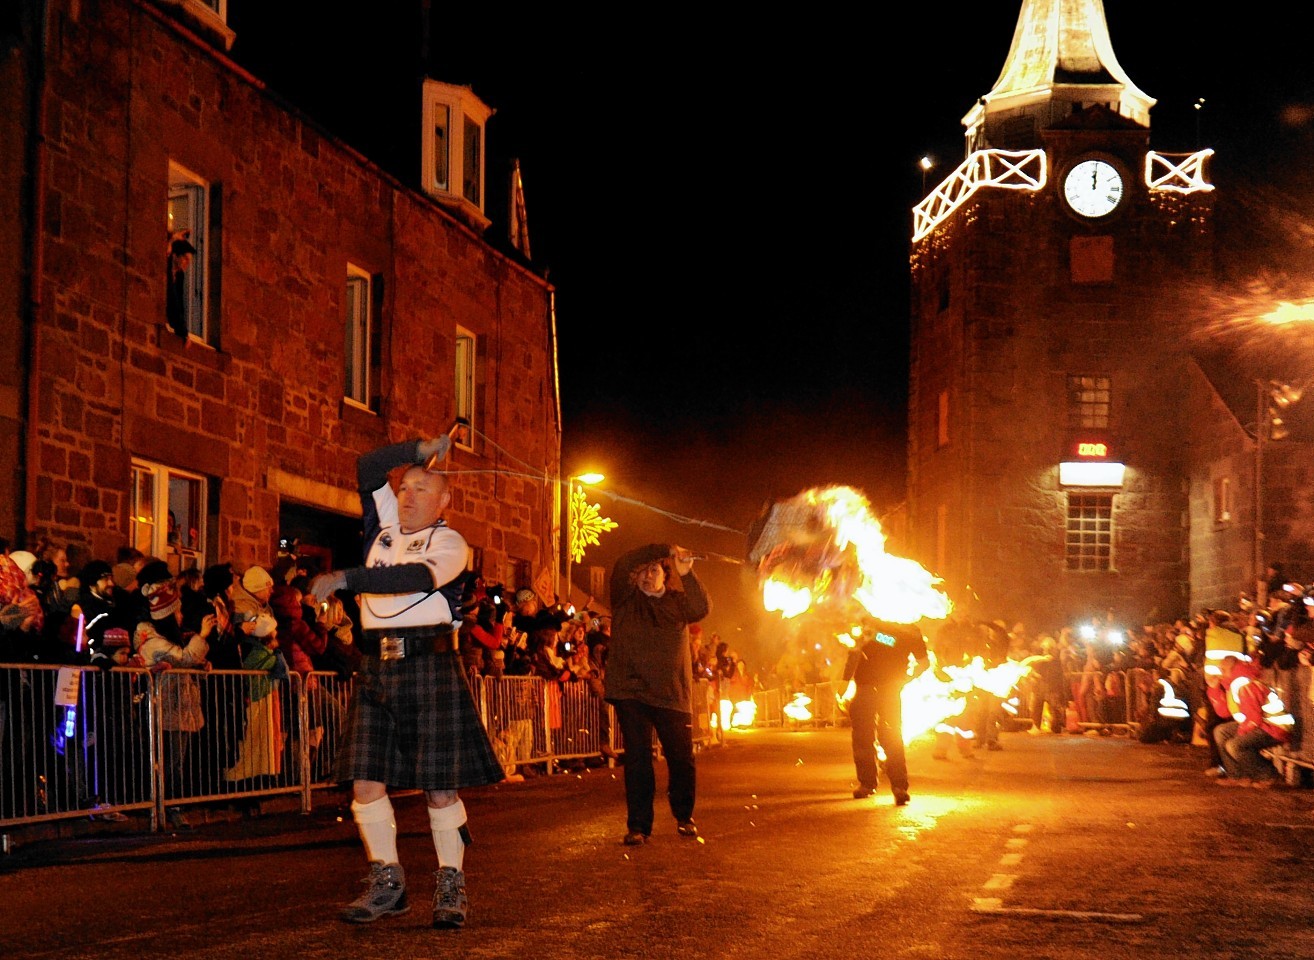 Stonehaven Fireballs Association is one of the groups that will benefit from this year's Midsummer Beer Happening